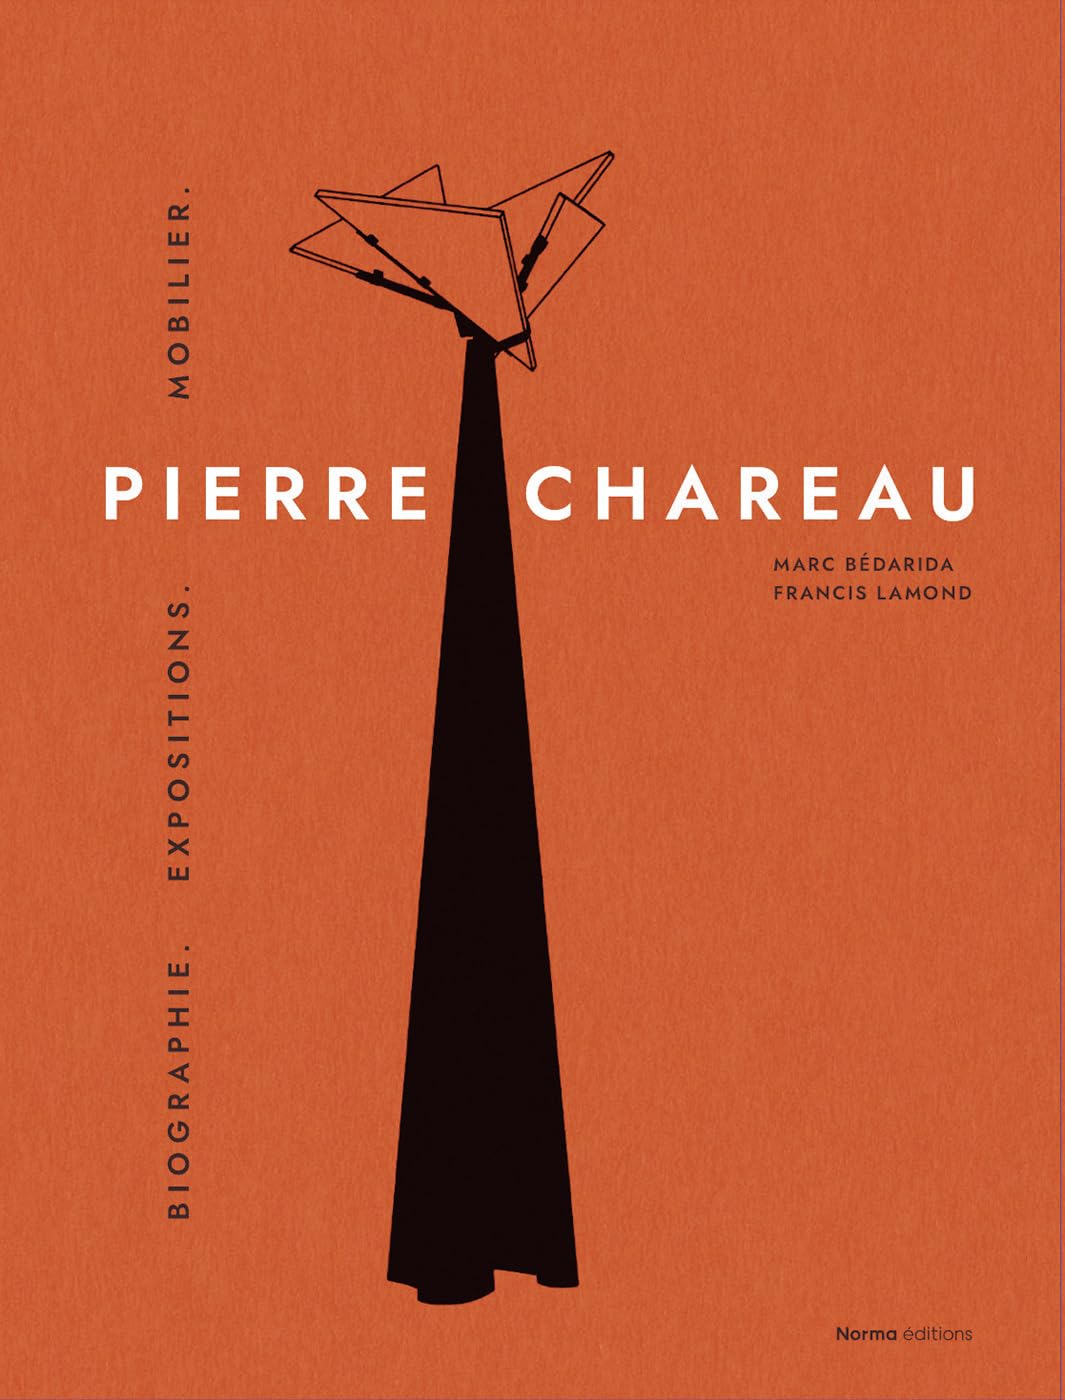 Pierre Chareau (Volume 1) (French Edition)